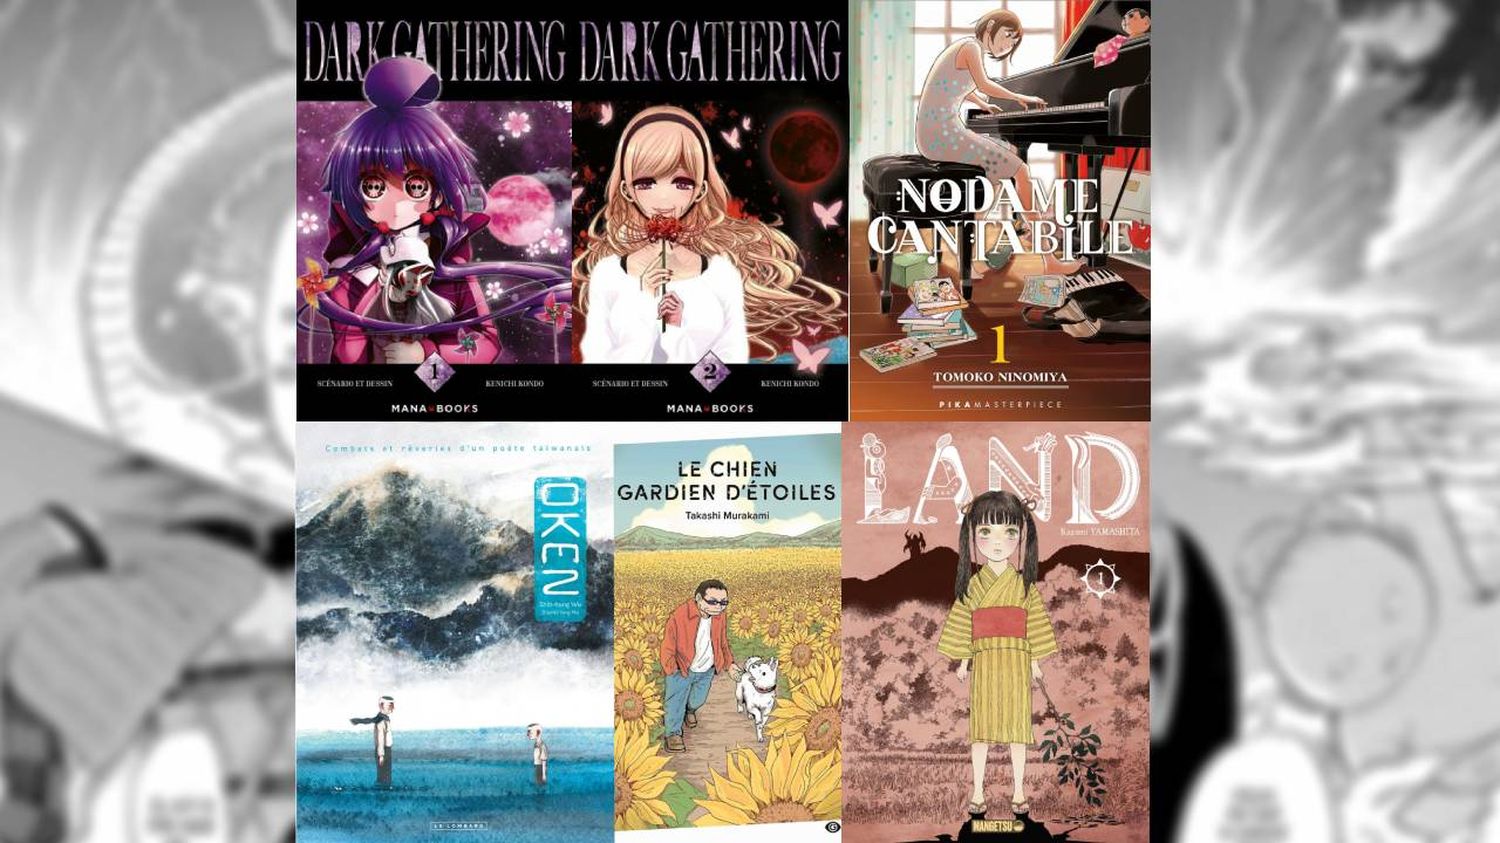 Manga: Our February selection full of poetry, music, the supernatural and legends